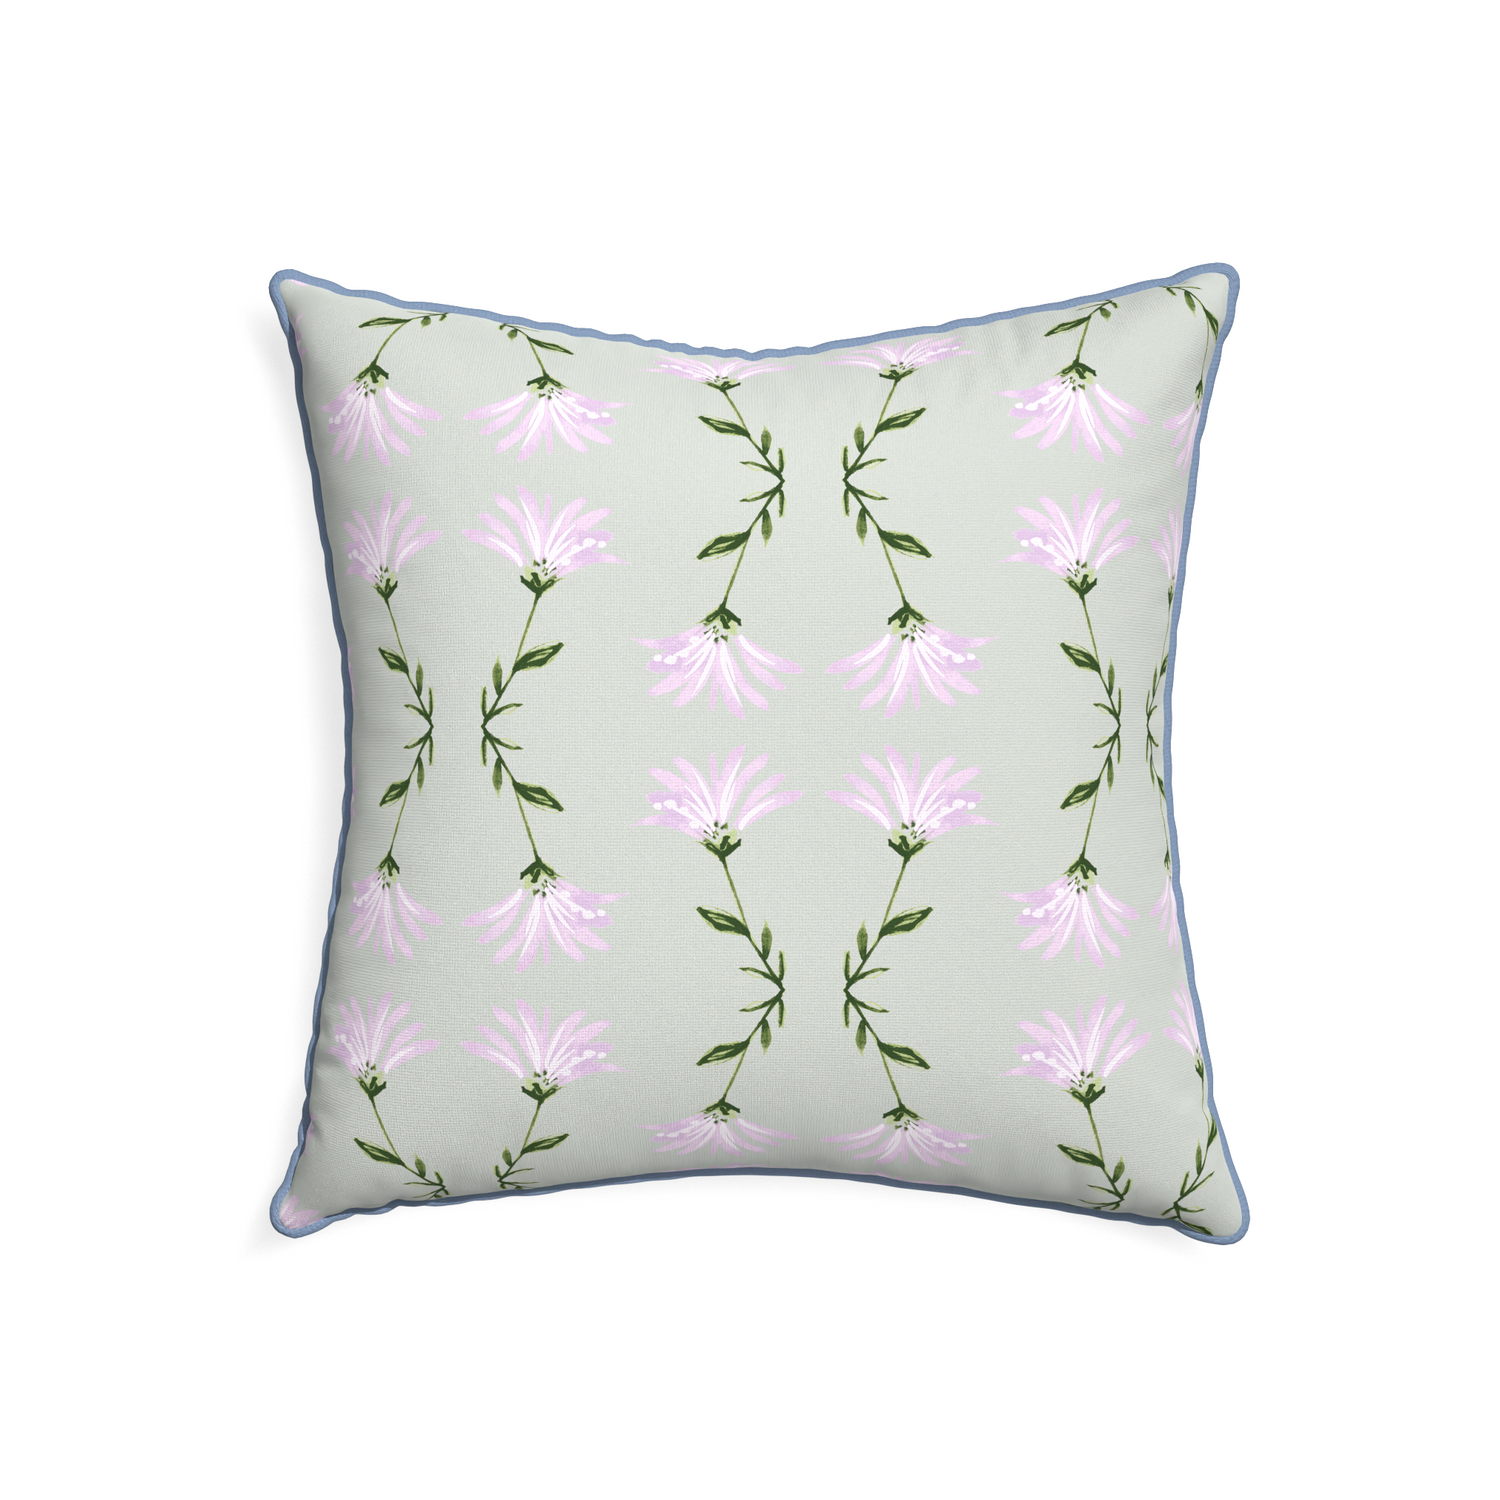 22-square marina sage custom pillow with sky piping on white background